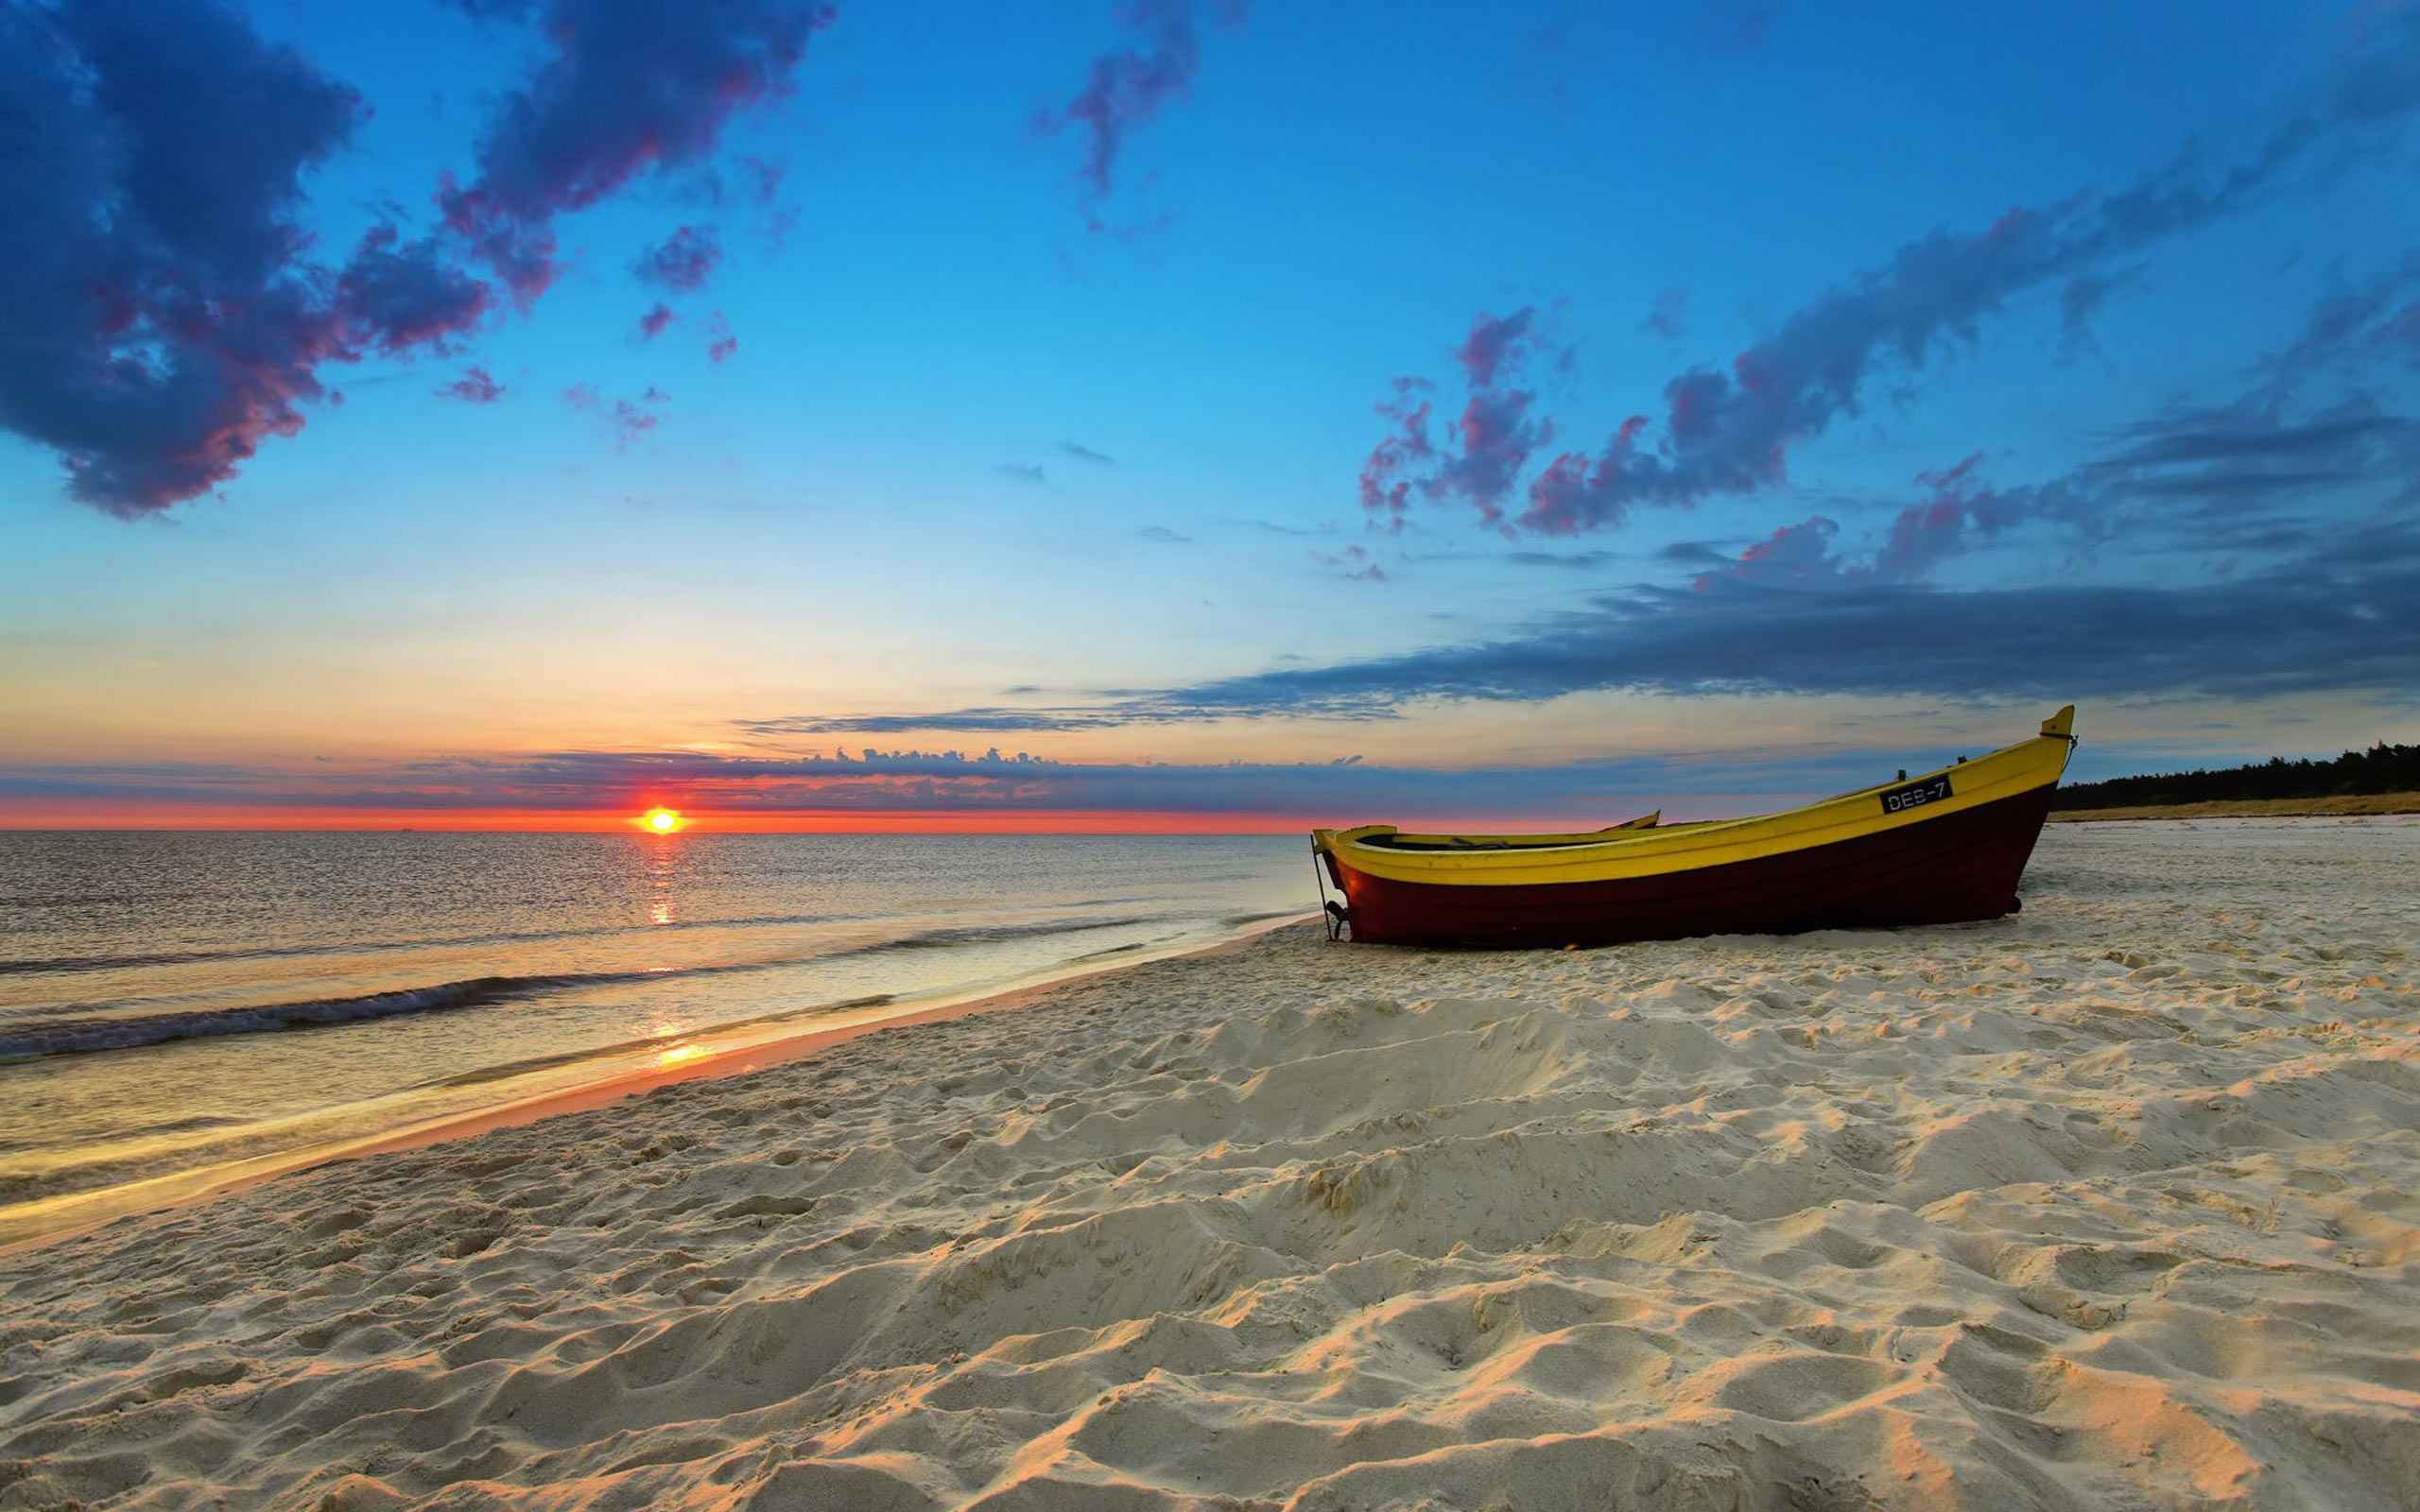 Sunset Beach with a boat resting on calm ocean waters.